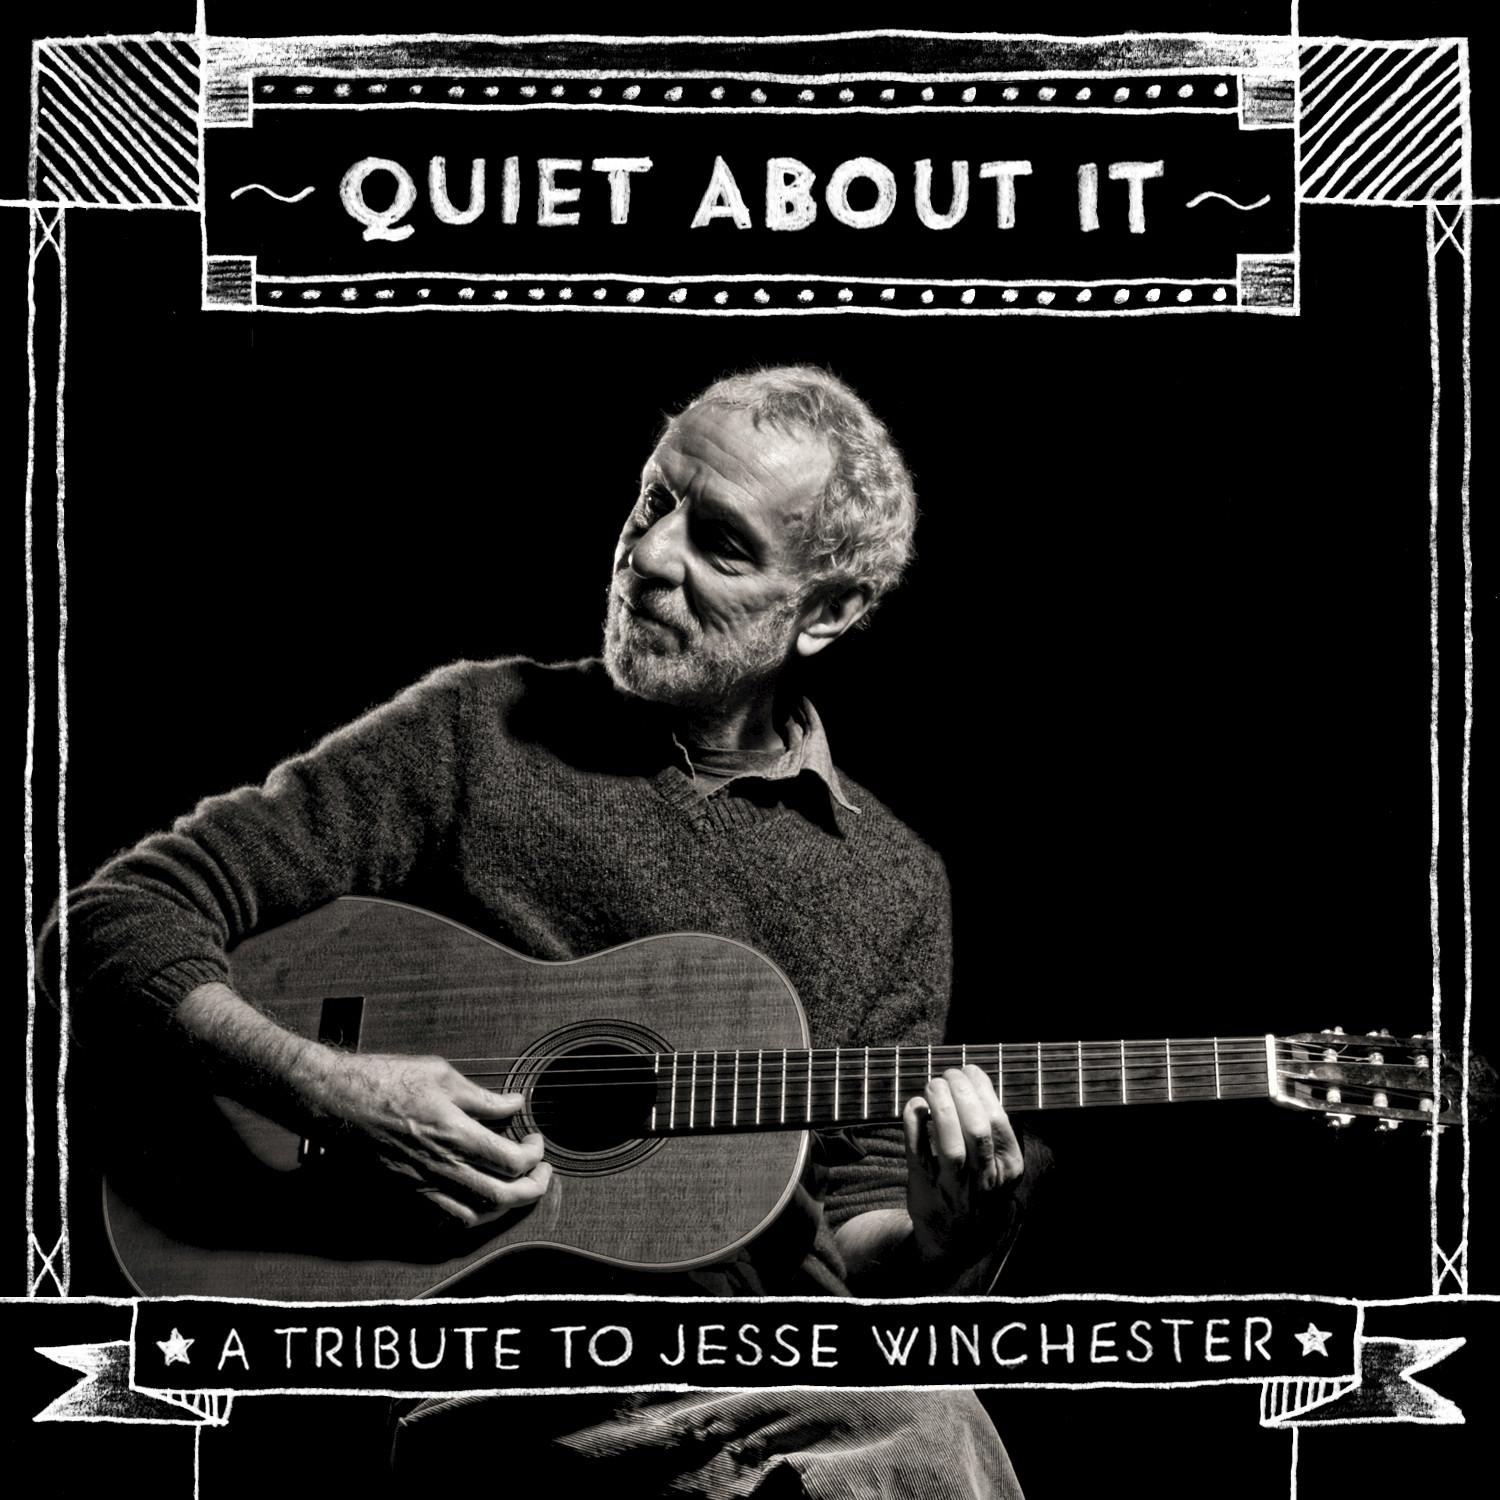 Quiet About It (A Tribute to Jesse Winchester)